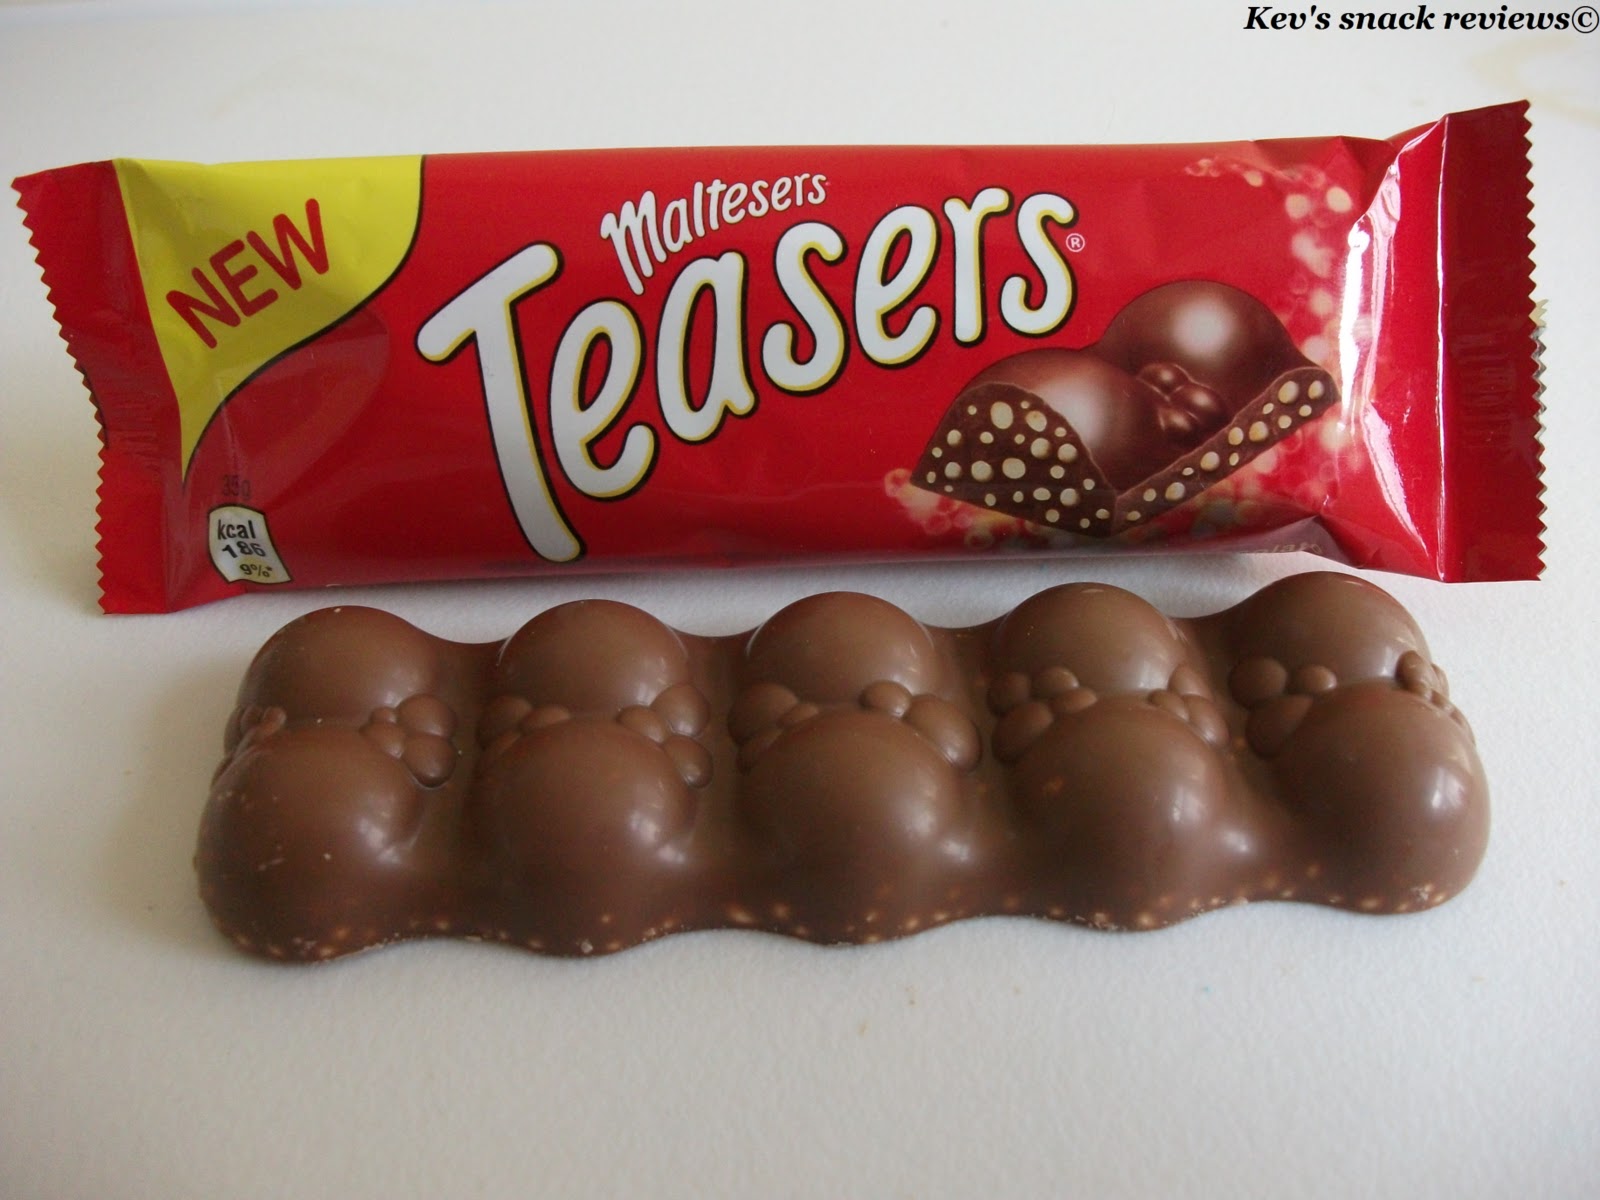 Maltesers Teasers Bar Review